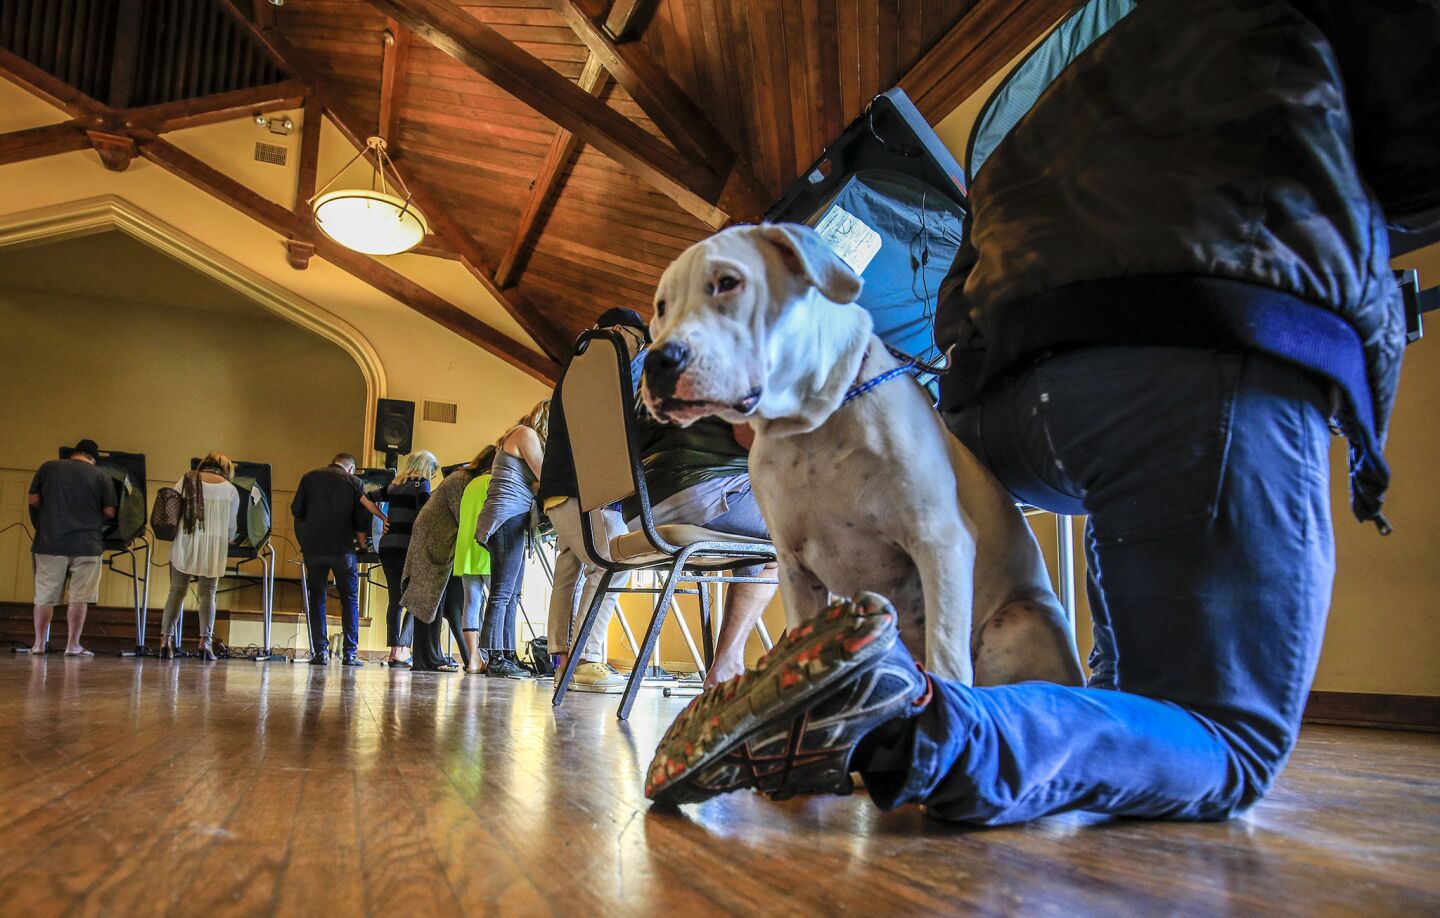 Zelda waits for her owner, Tony Payan, to cast his ballot at the Neighborhood Congregational Church in Laguna Beach on election day.